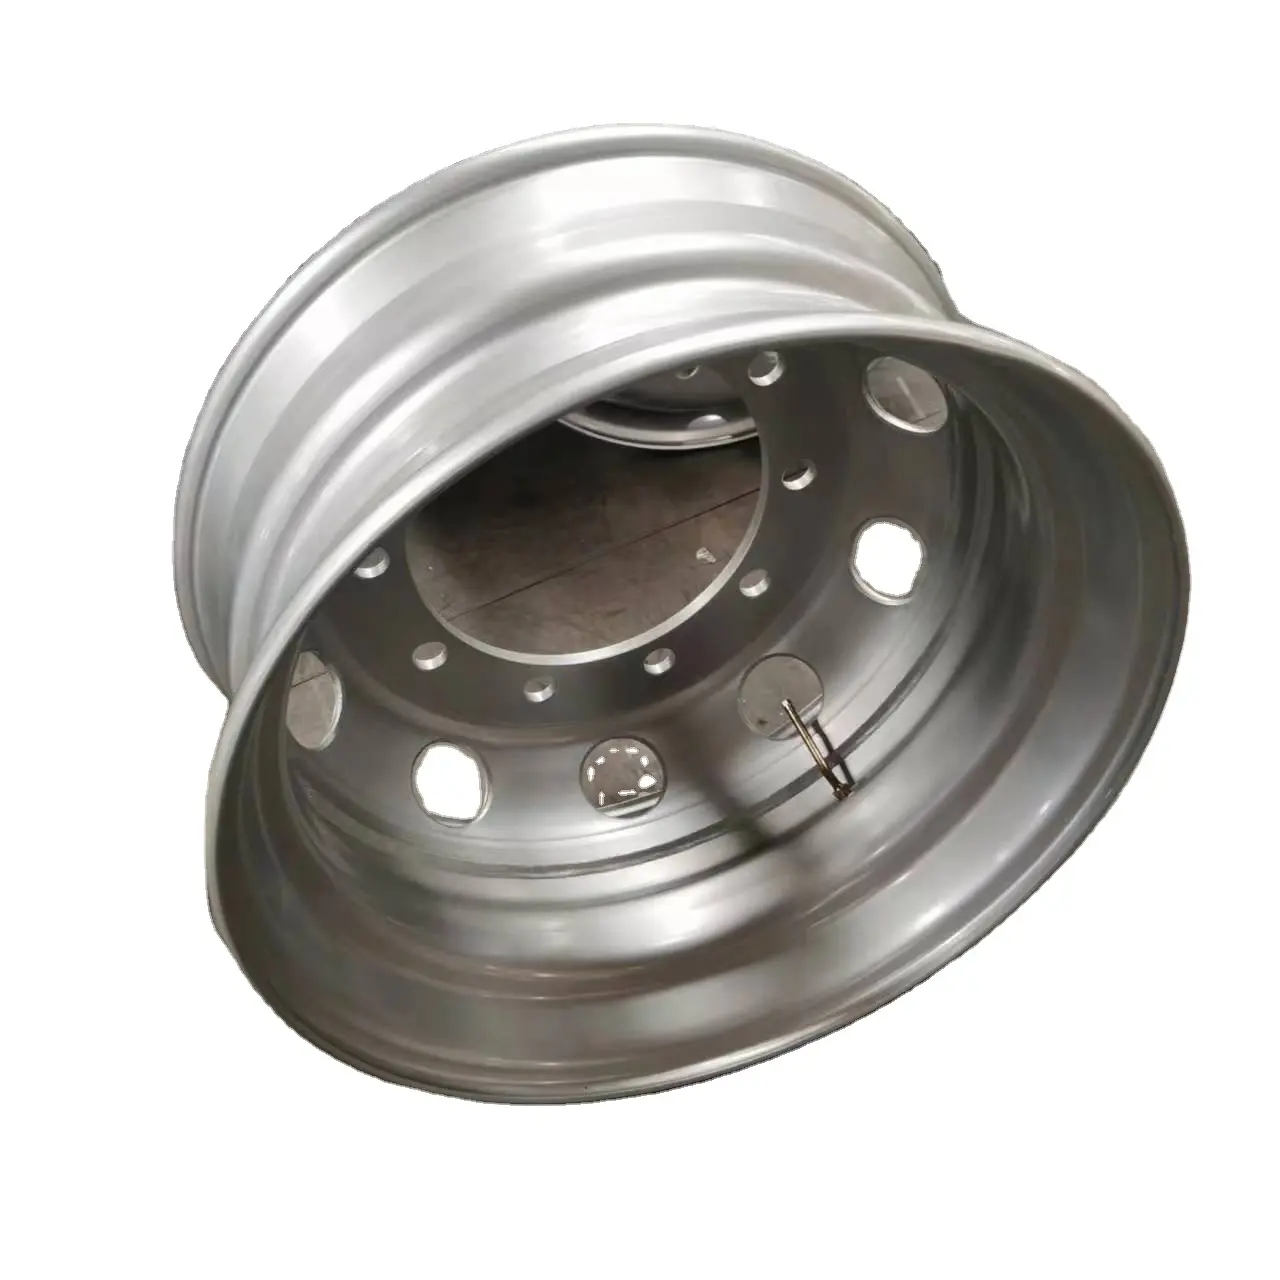 Heavy Duty Truck Parts Truck Tires Use 22.5 Truck Wheel Rim For The South American Market